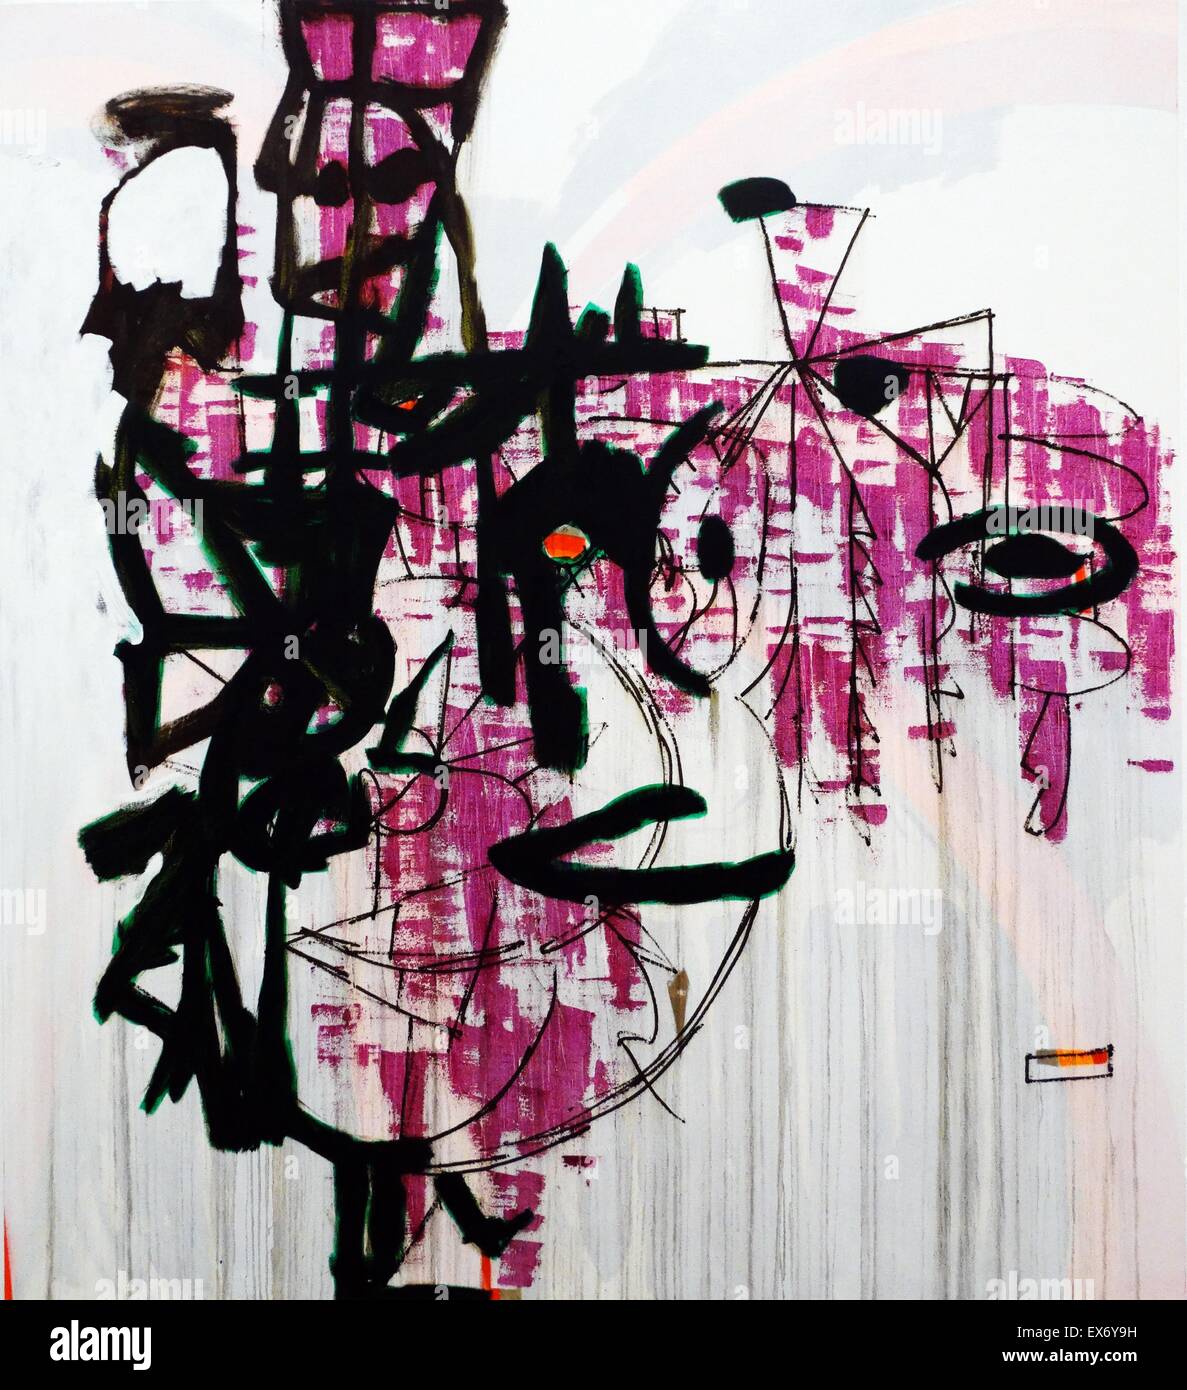 Jakealoo 2012 by Charline von Heyl 1960- (Born Germany, works in the USA). Oil paint and acrylic paint on canvas Stock Photo